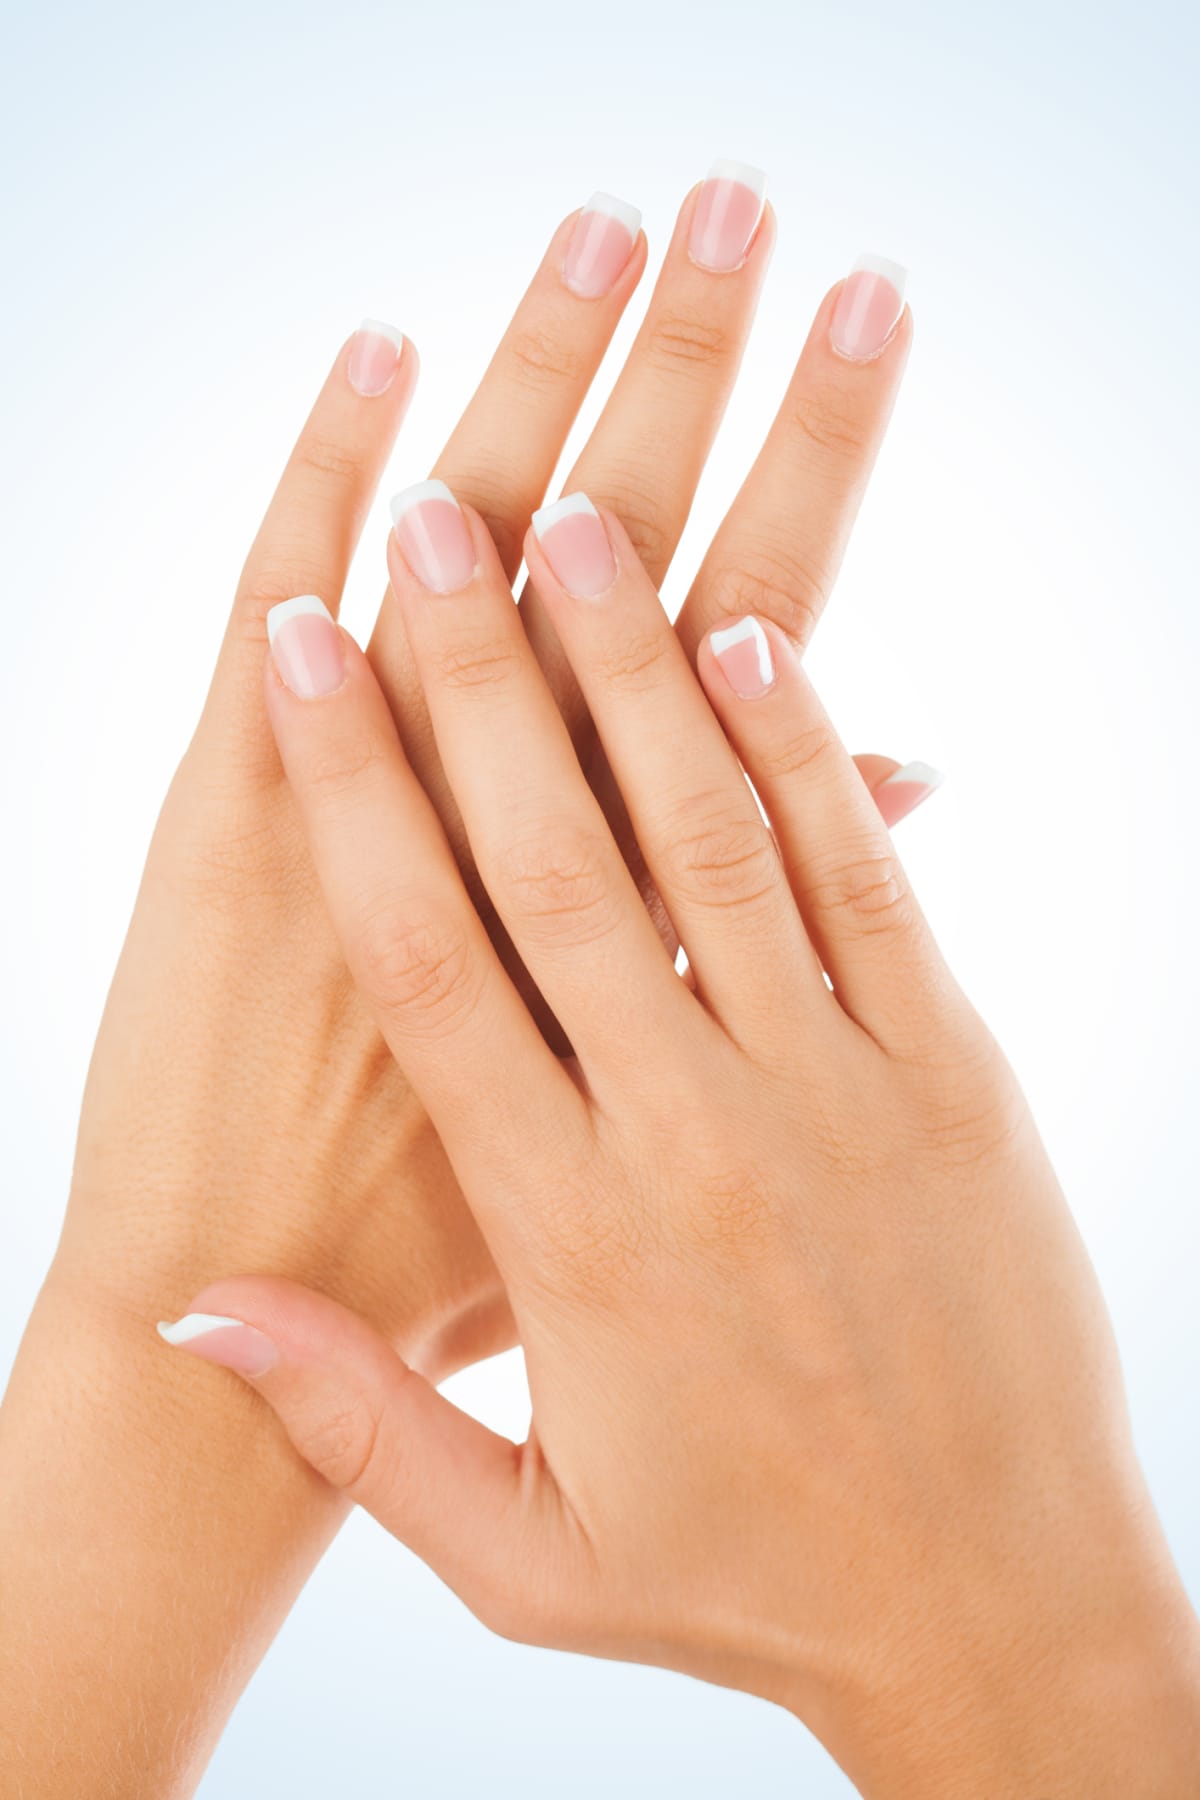 Set of nicely manicured fingernails with french manicure over white background.